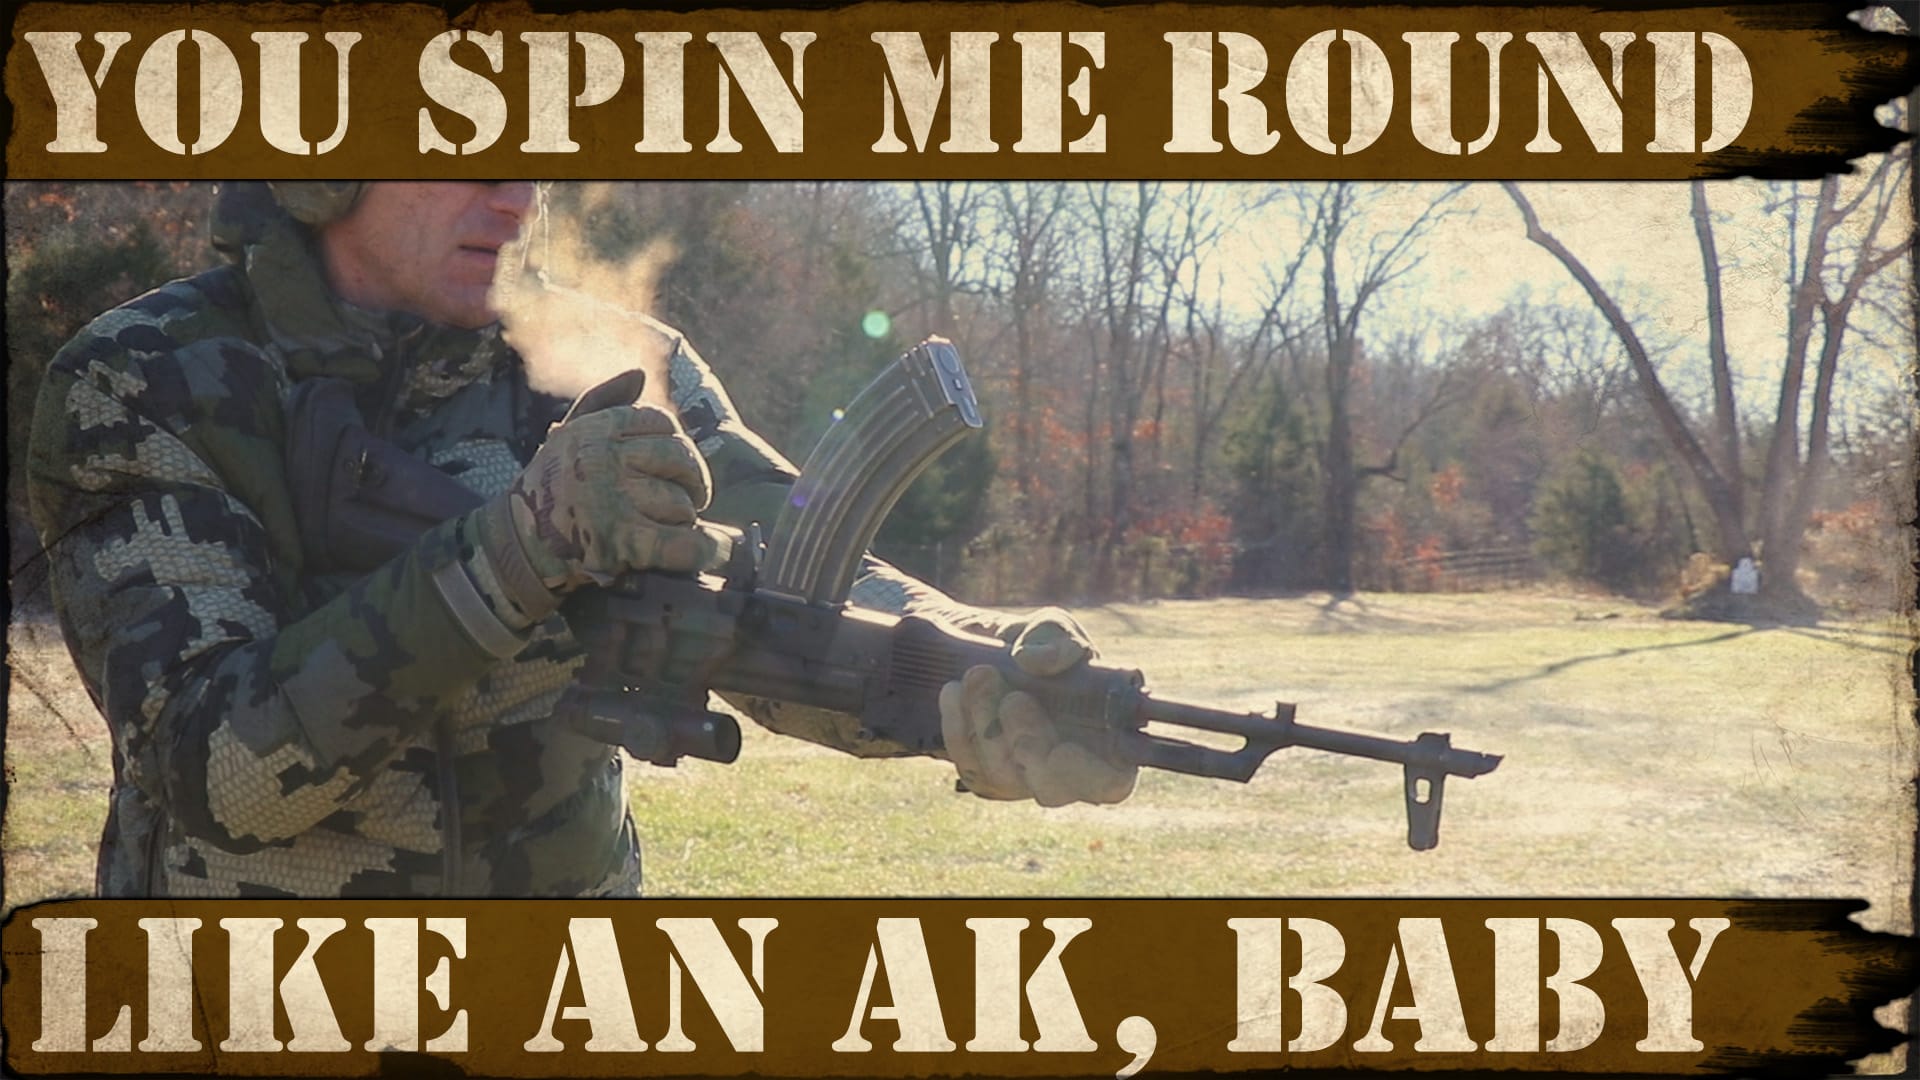 You Spin me Round, Like an AK Baby! – DPMS Black Panther AK takes a beating!